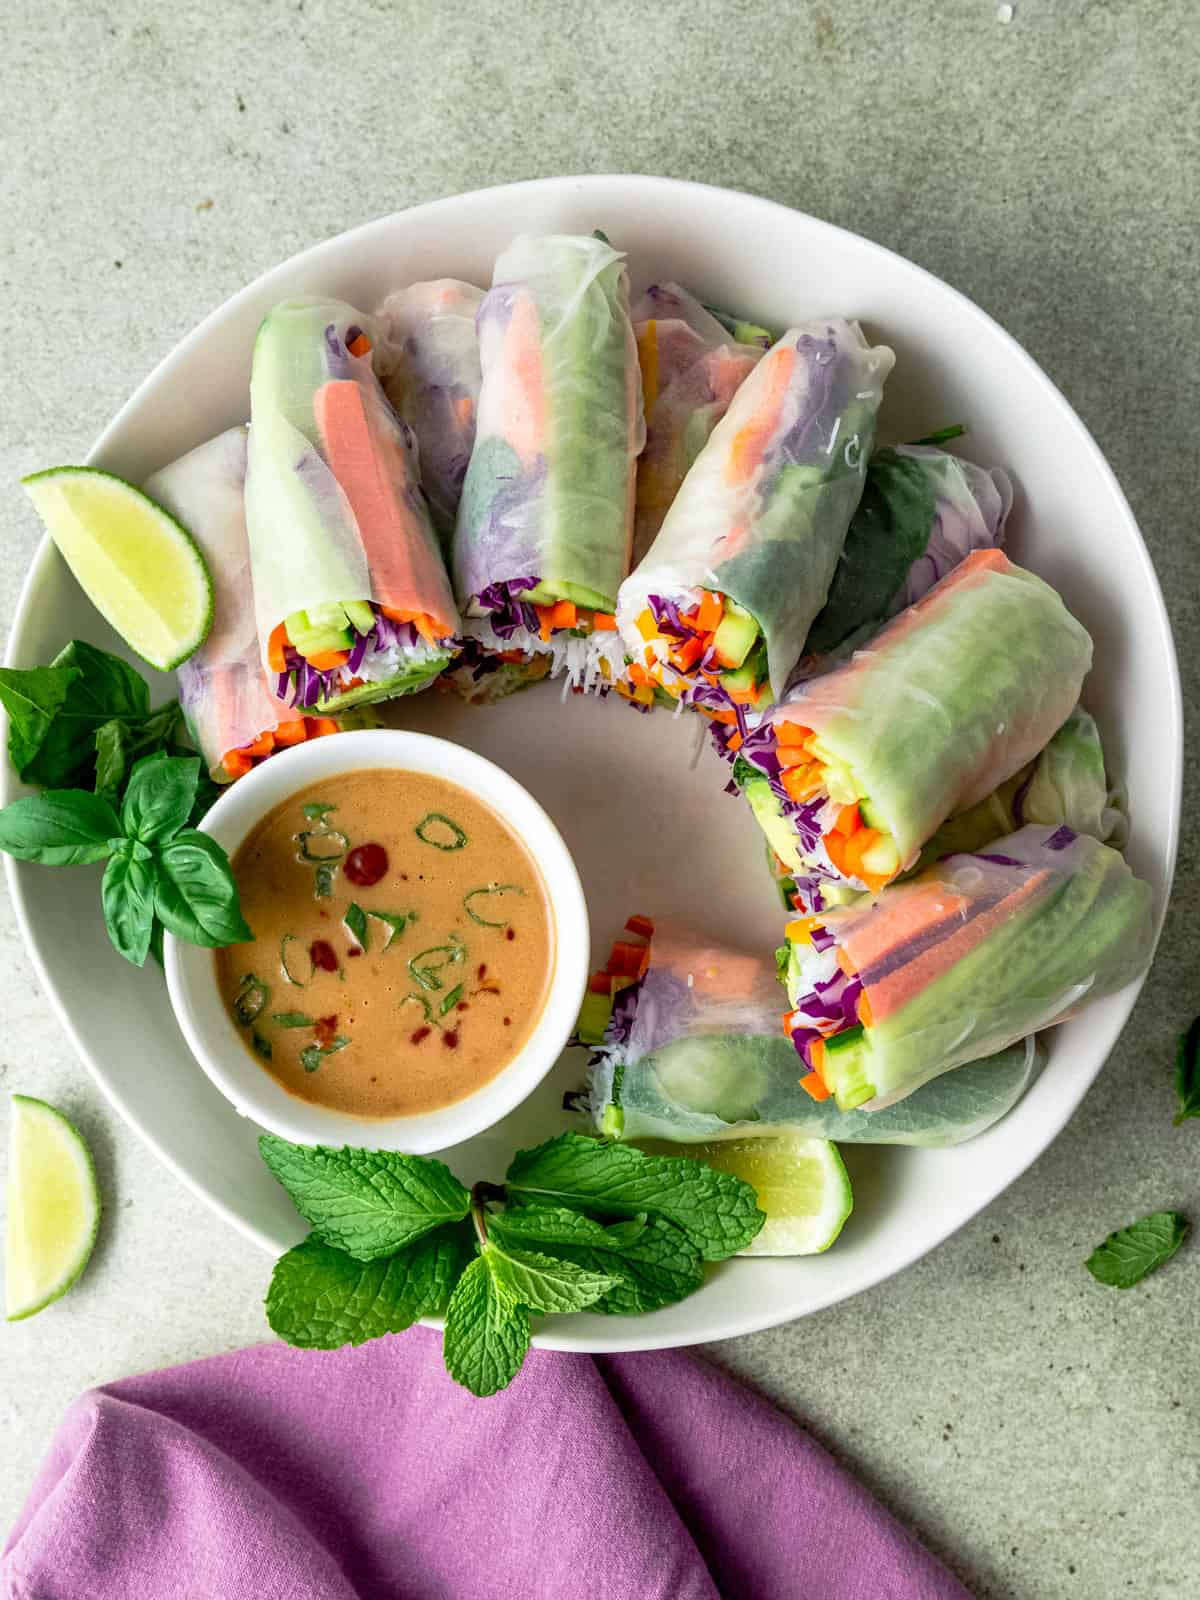 Fresh summer rolls with avocado and served with a peanut sauce for dipping.